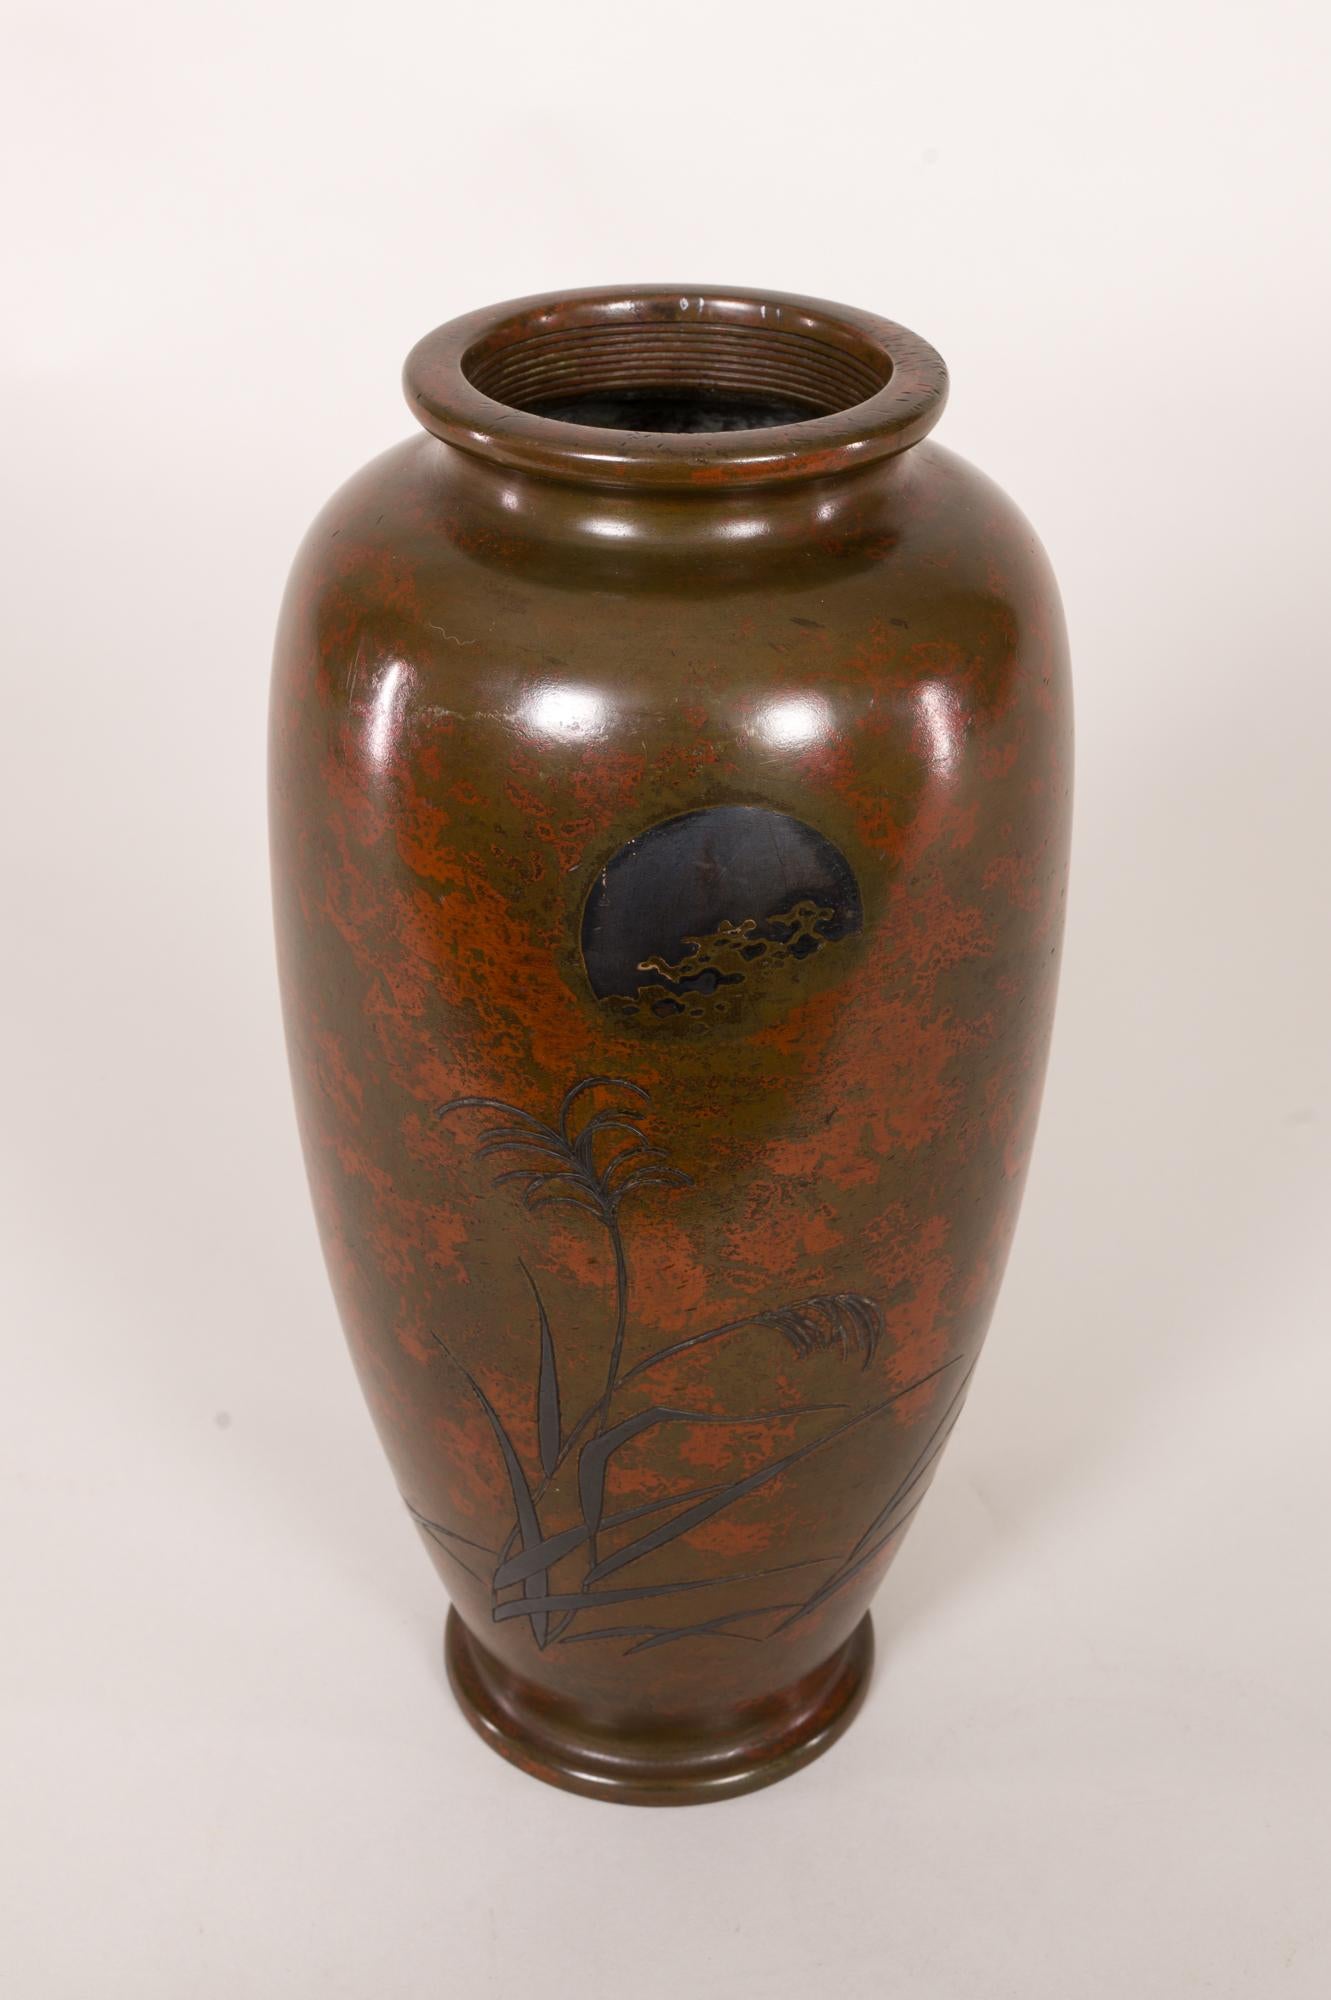 Antique Japanese bronze vase with landscape and red patina, Meiji Period (1868-1912) bronze vase with wild grasses under a silver moon. Red undercolor is exposed throughout the vase representing clouds. Artist seal on the bottom reads: Miyagawa.